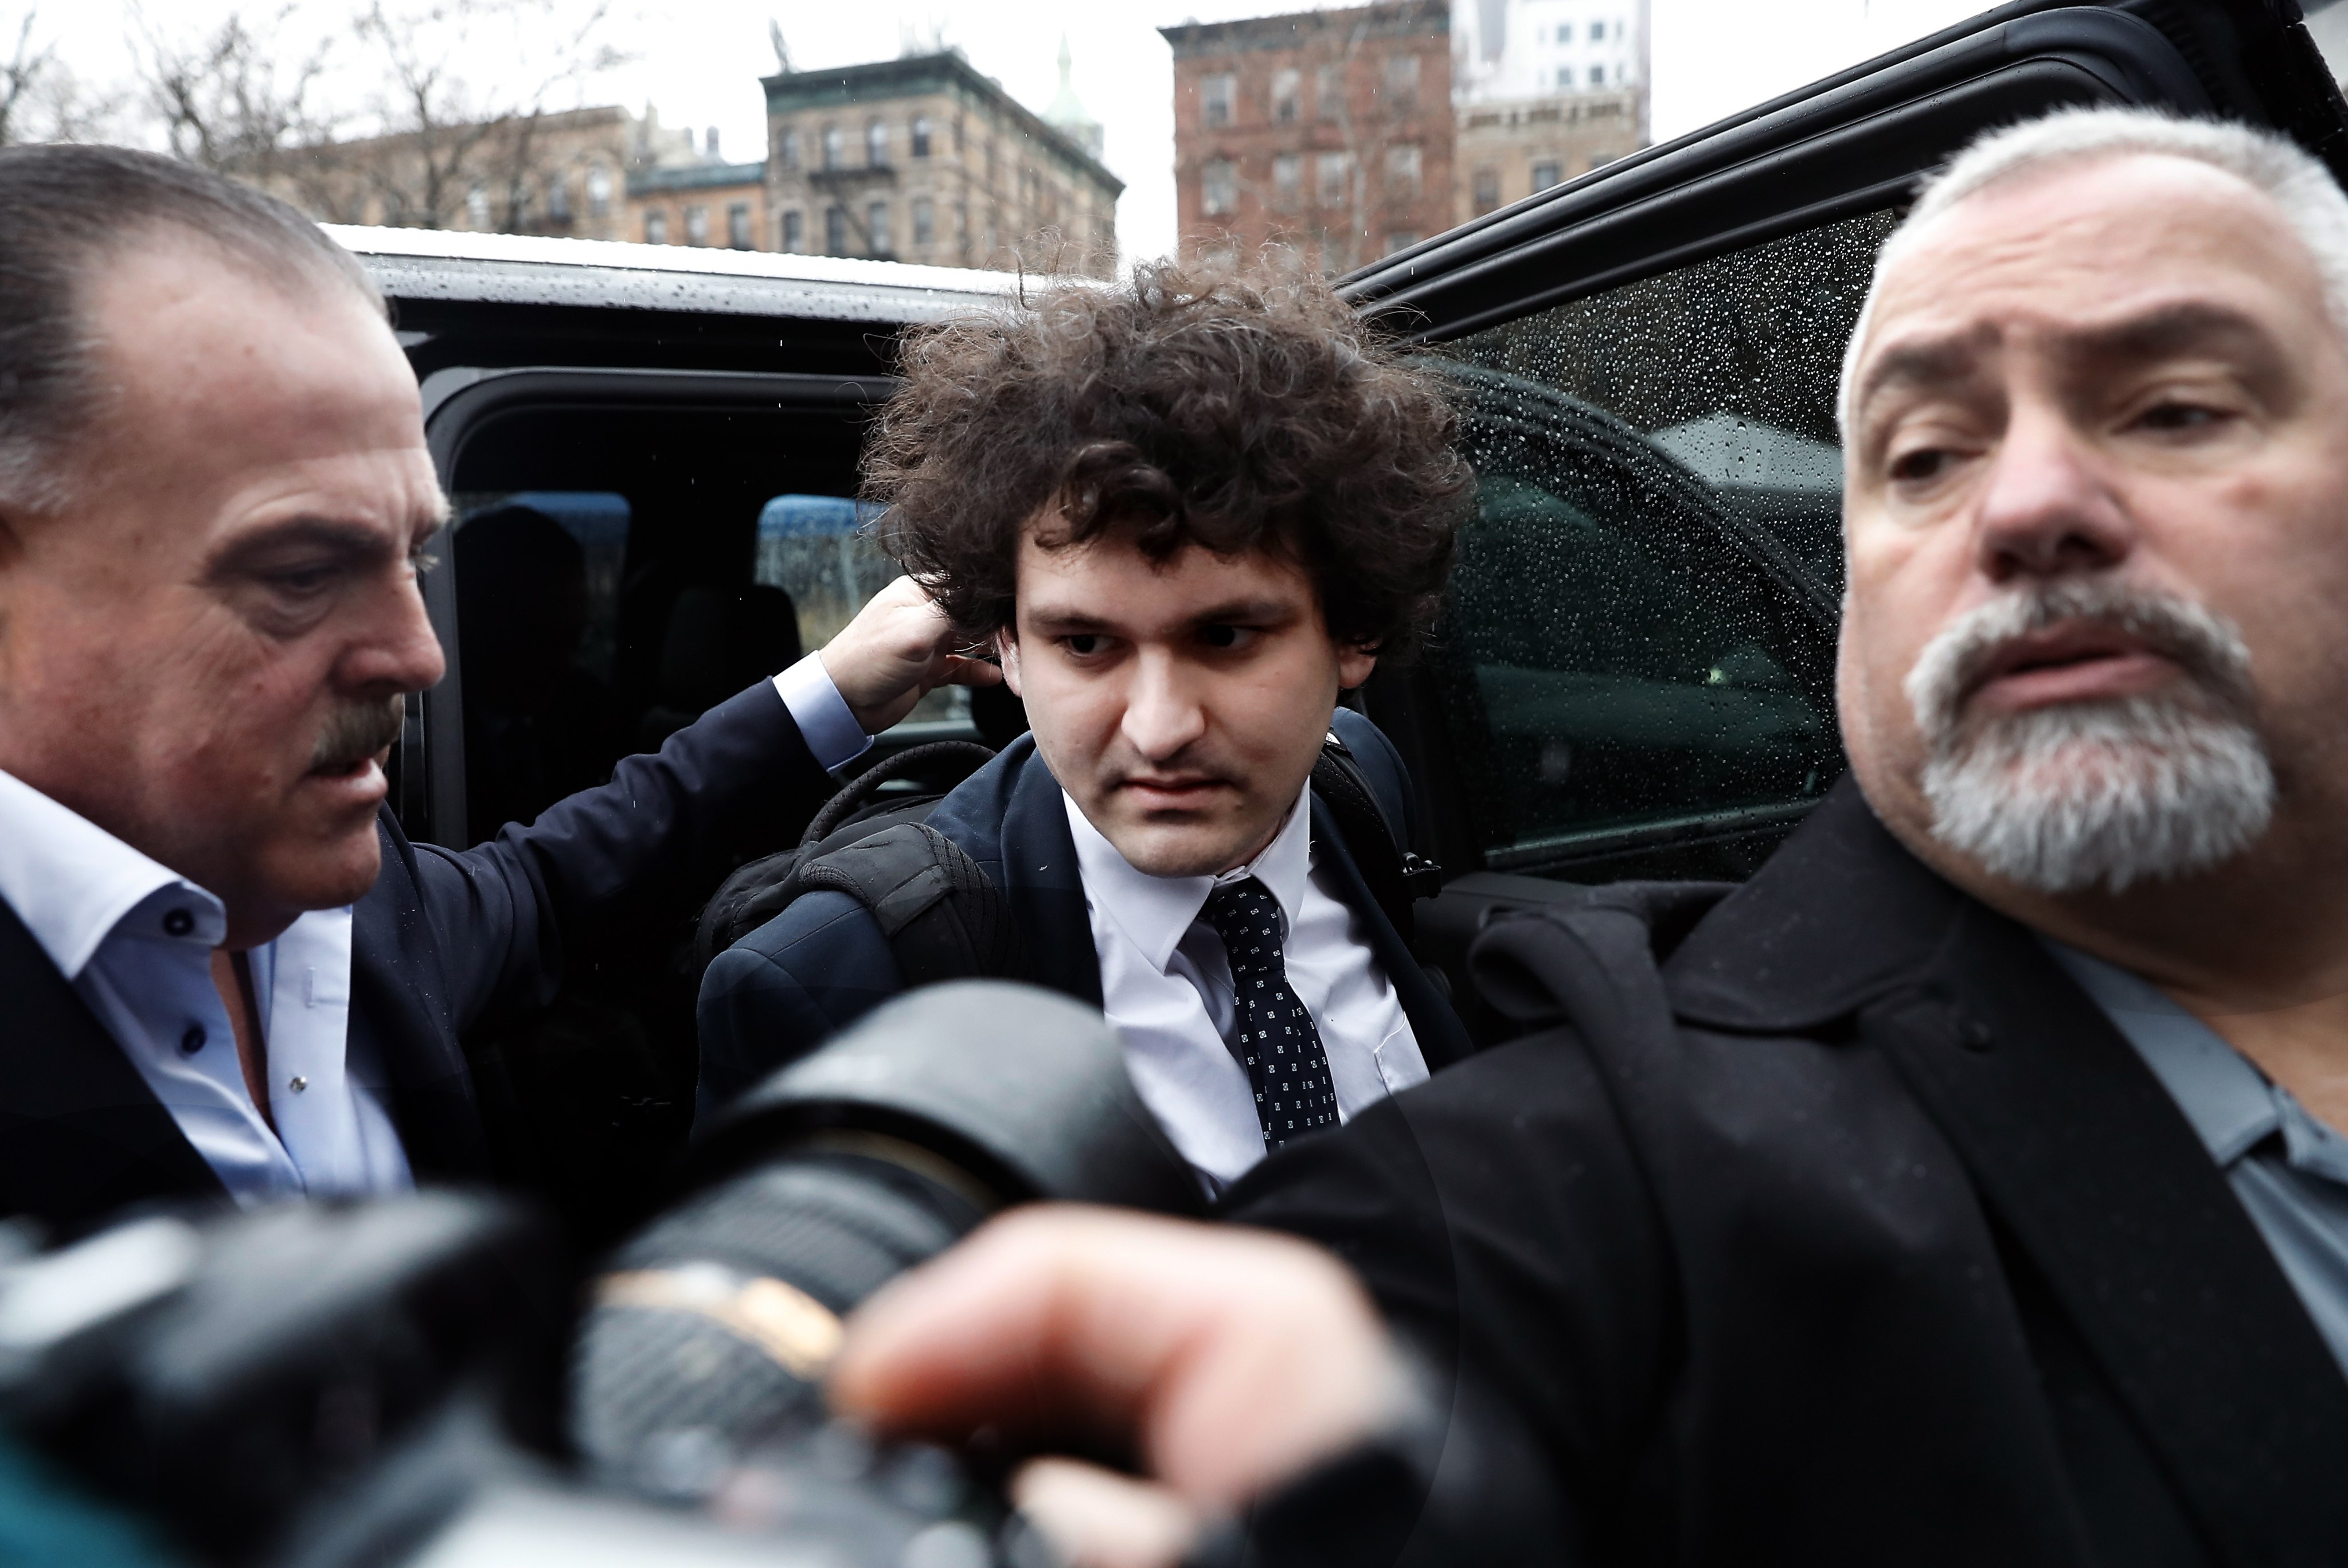 Cryptocurrency entrepreneur Sam Bankman-Fried (centre) arrives for a plea hearing in New York on Tuesday. Photo: EPA-EFE